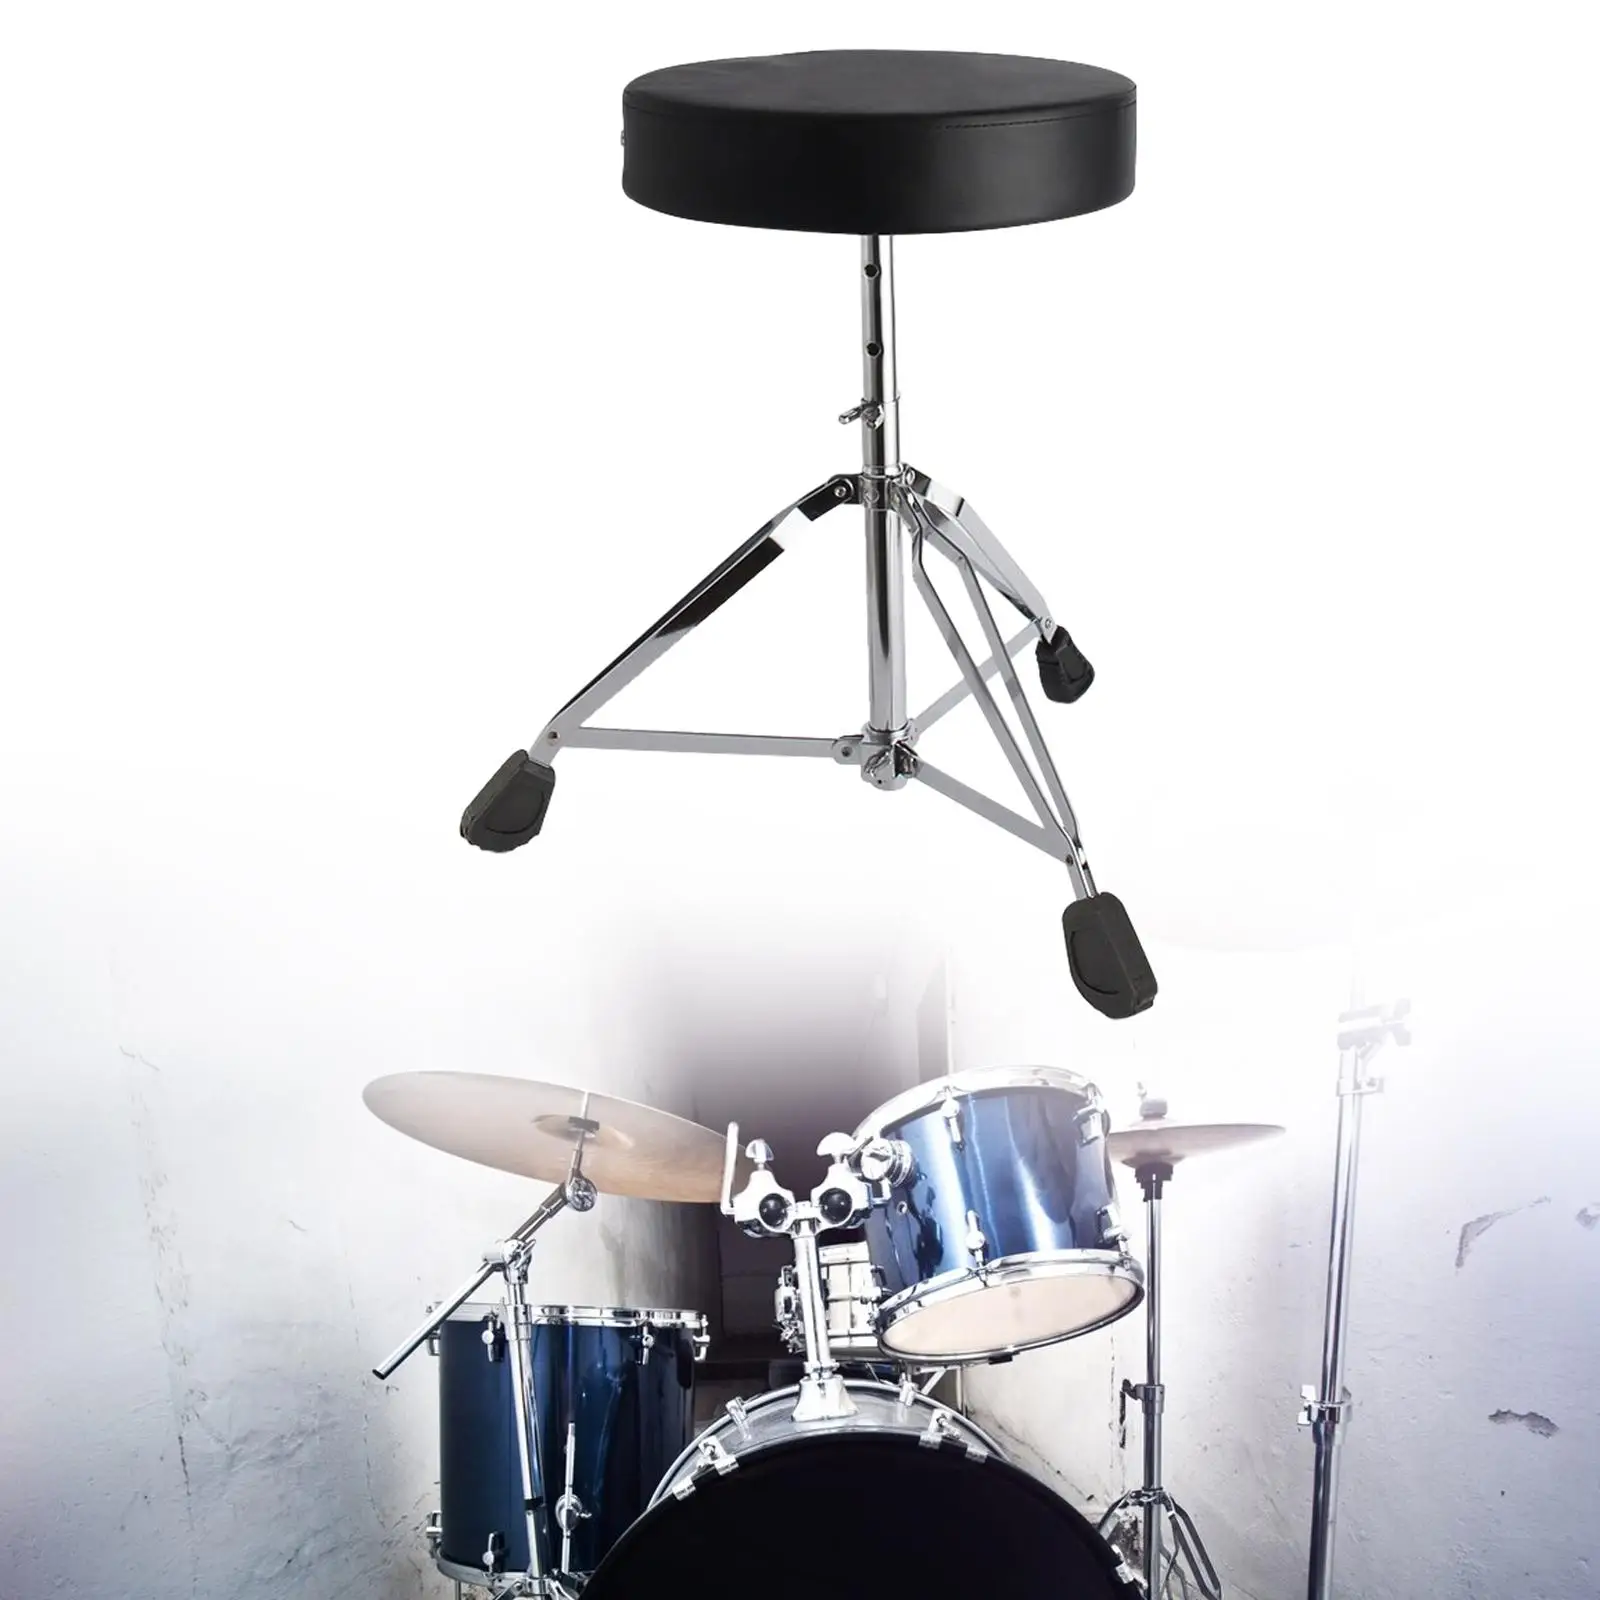 Padded Seat Drum Stool Keyboards for Musician Performers Instrument Players